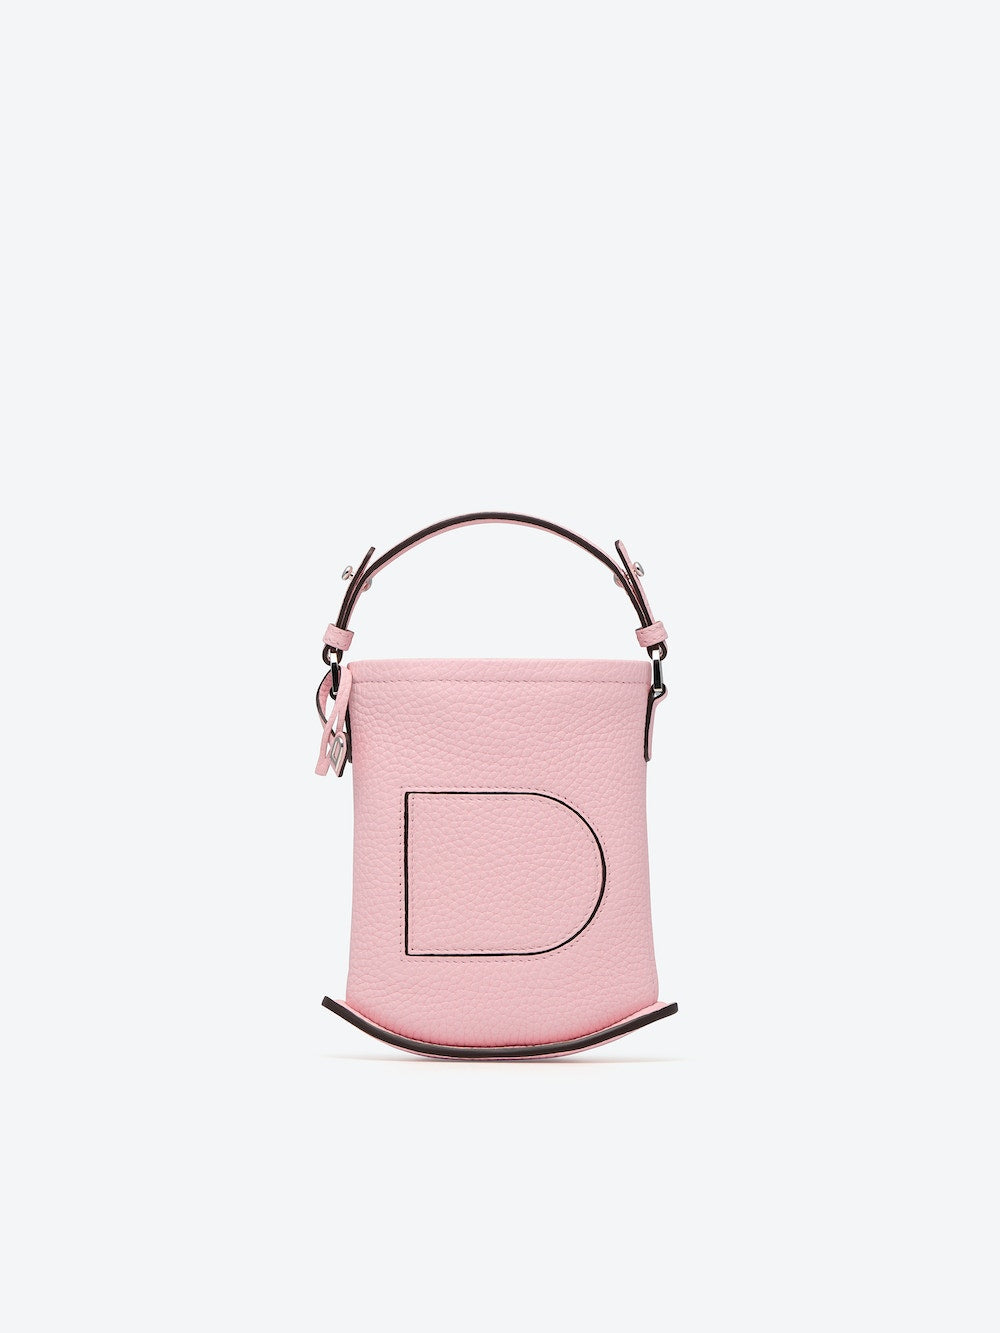 Delvaux Pin Toy in Taurillon Soft (Bloom)